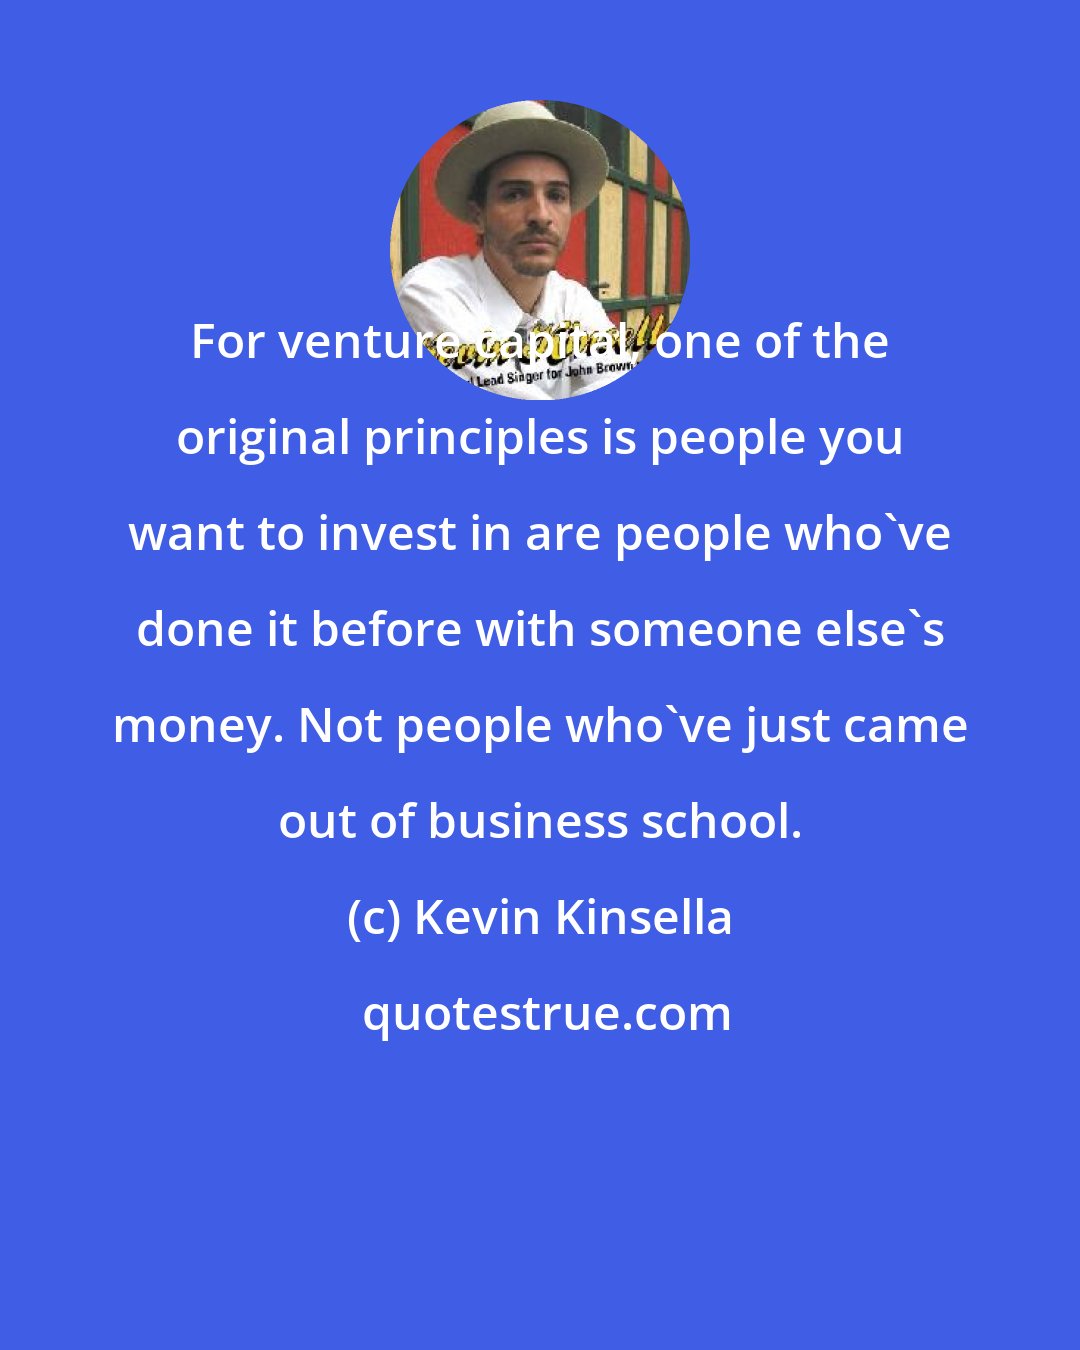 Kevin Kinsella: For venture capital, one of the original principles is people you want to invest in are people who've done it before with someone else's money. Not people who've just came out of business school.